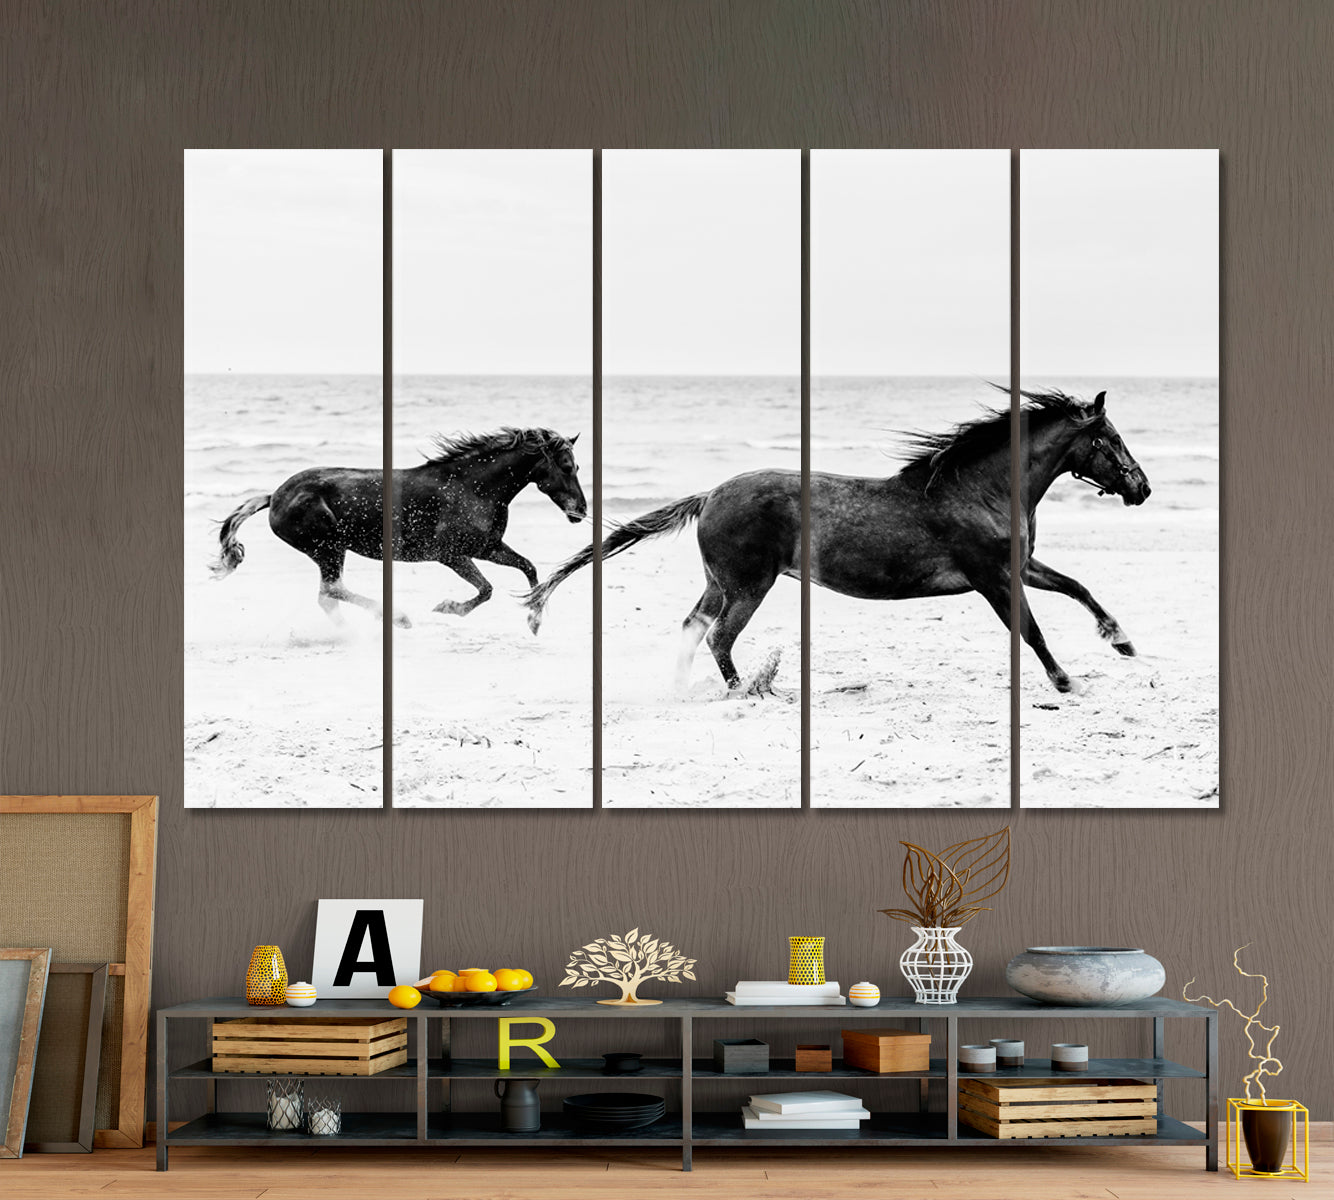 Horses Gallop Running on the Seashore Freedom Wildness Black and White Animals Canvas Print Artesty 5 panels 36" x 24" 